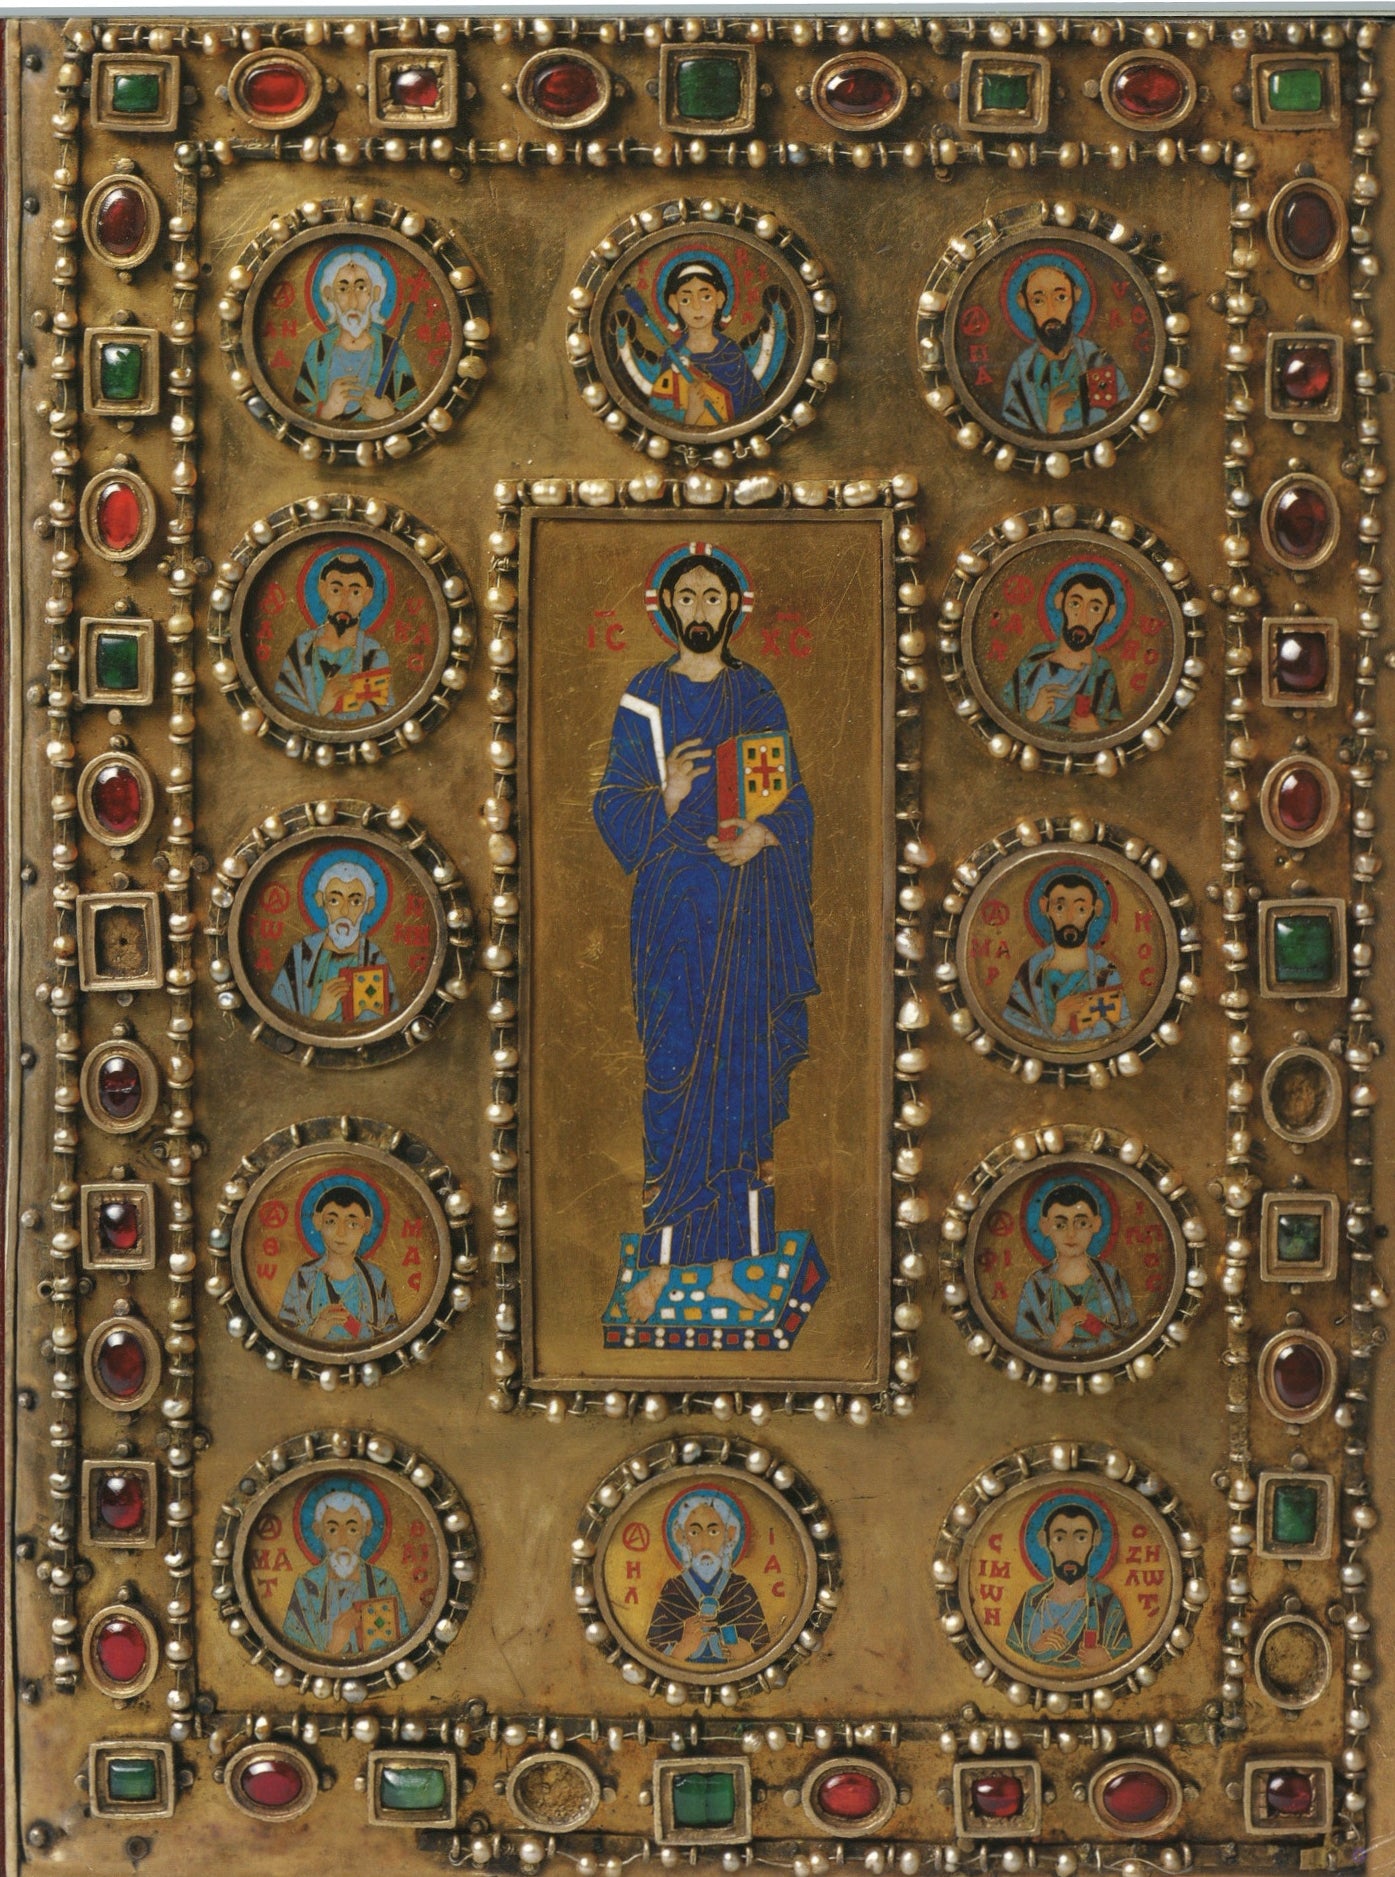 Glory of Byzantium, The ~ Art and Culture of the Middle Byzantine Era, A.D. 843-1261